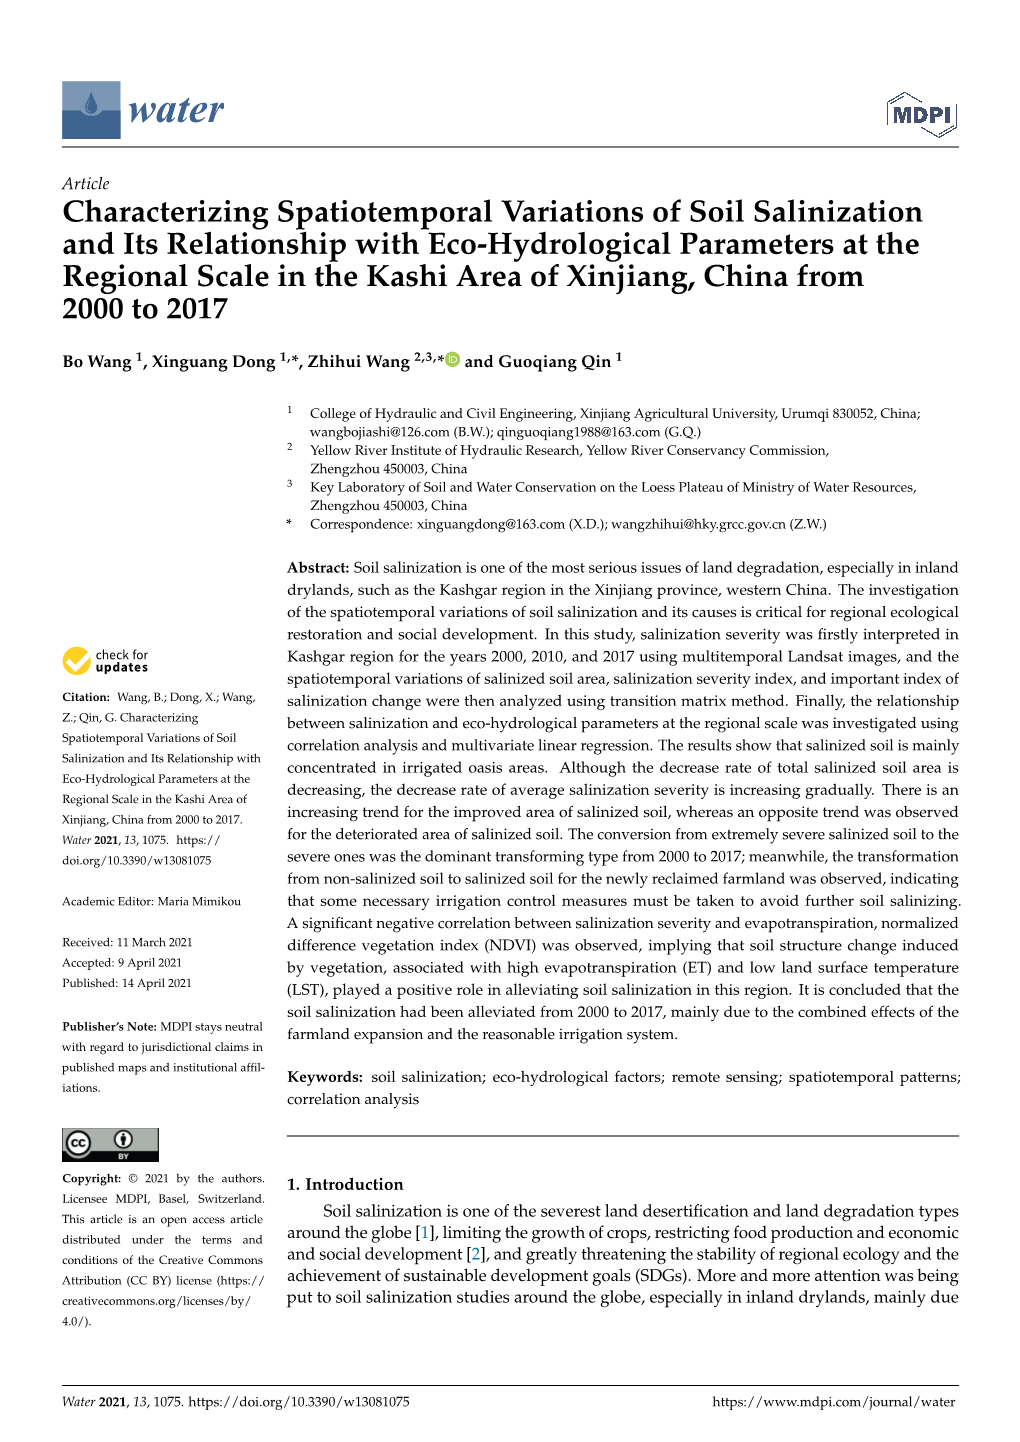 Characterizing Spatiotemporal Variations of Soil Salinization And